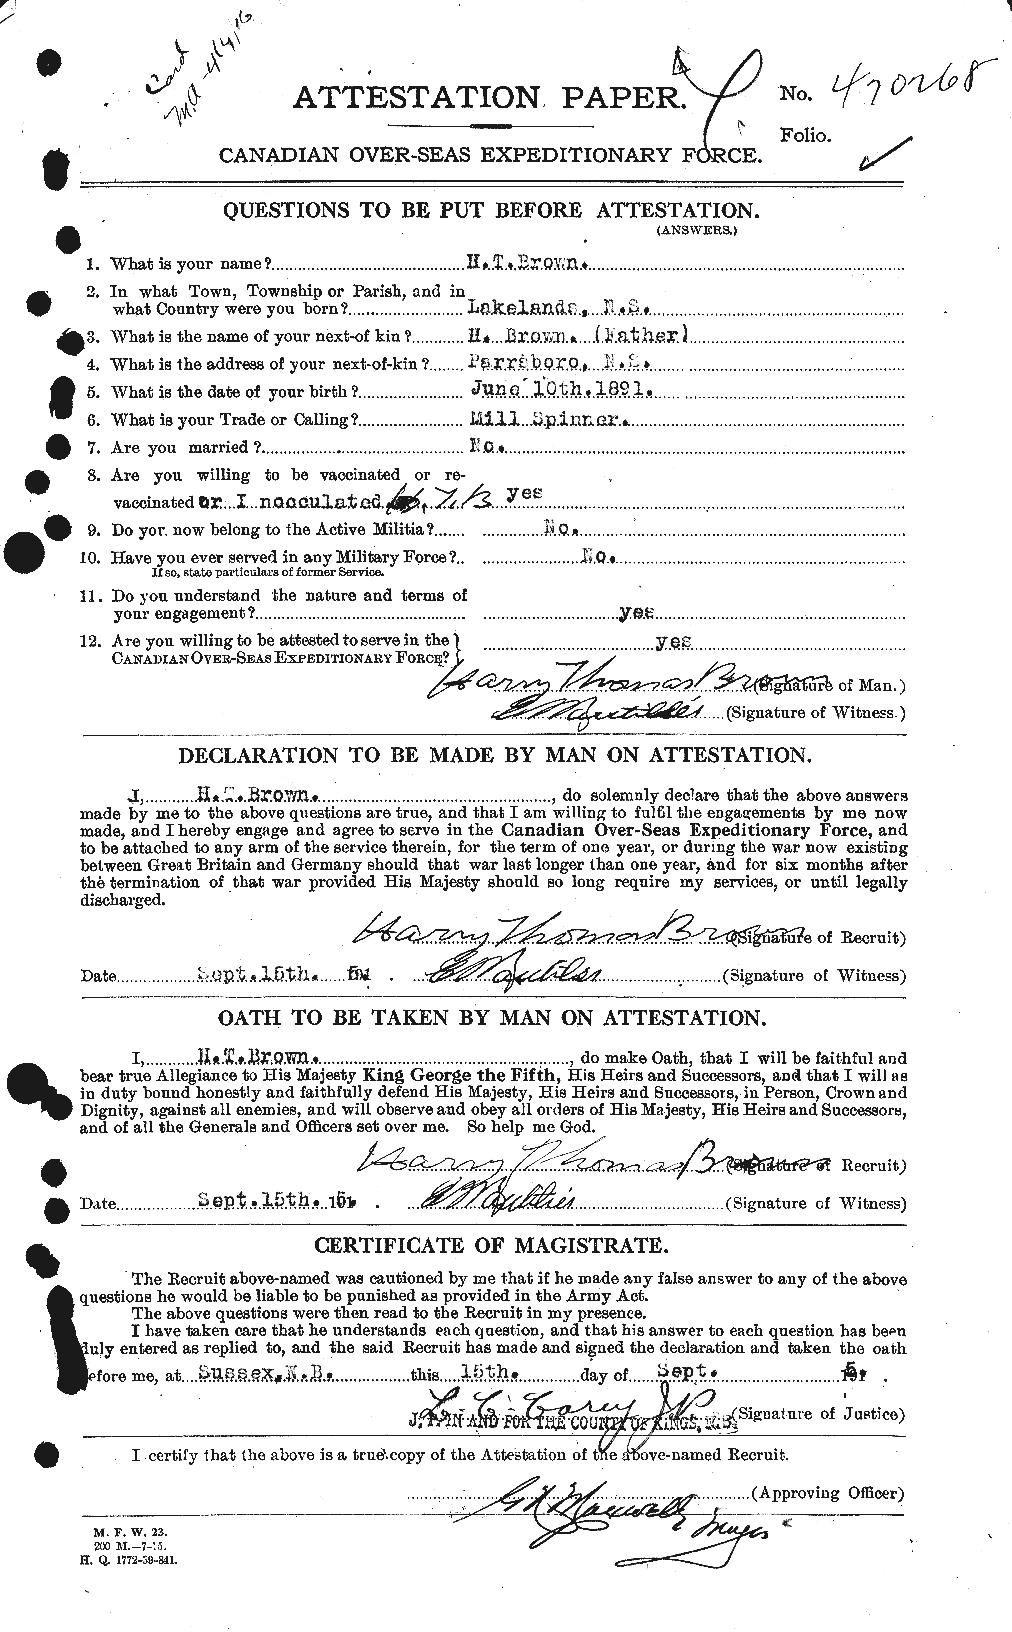 Personnel Records of the First World War - CEF 265473a